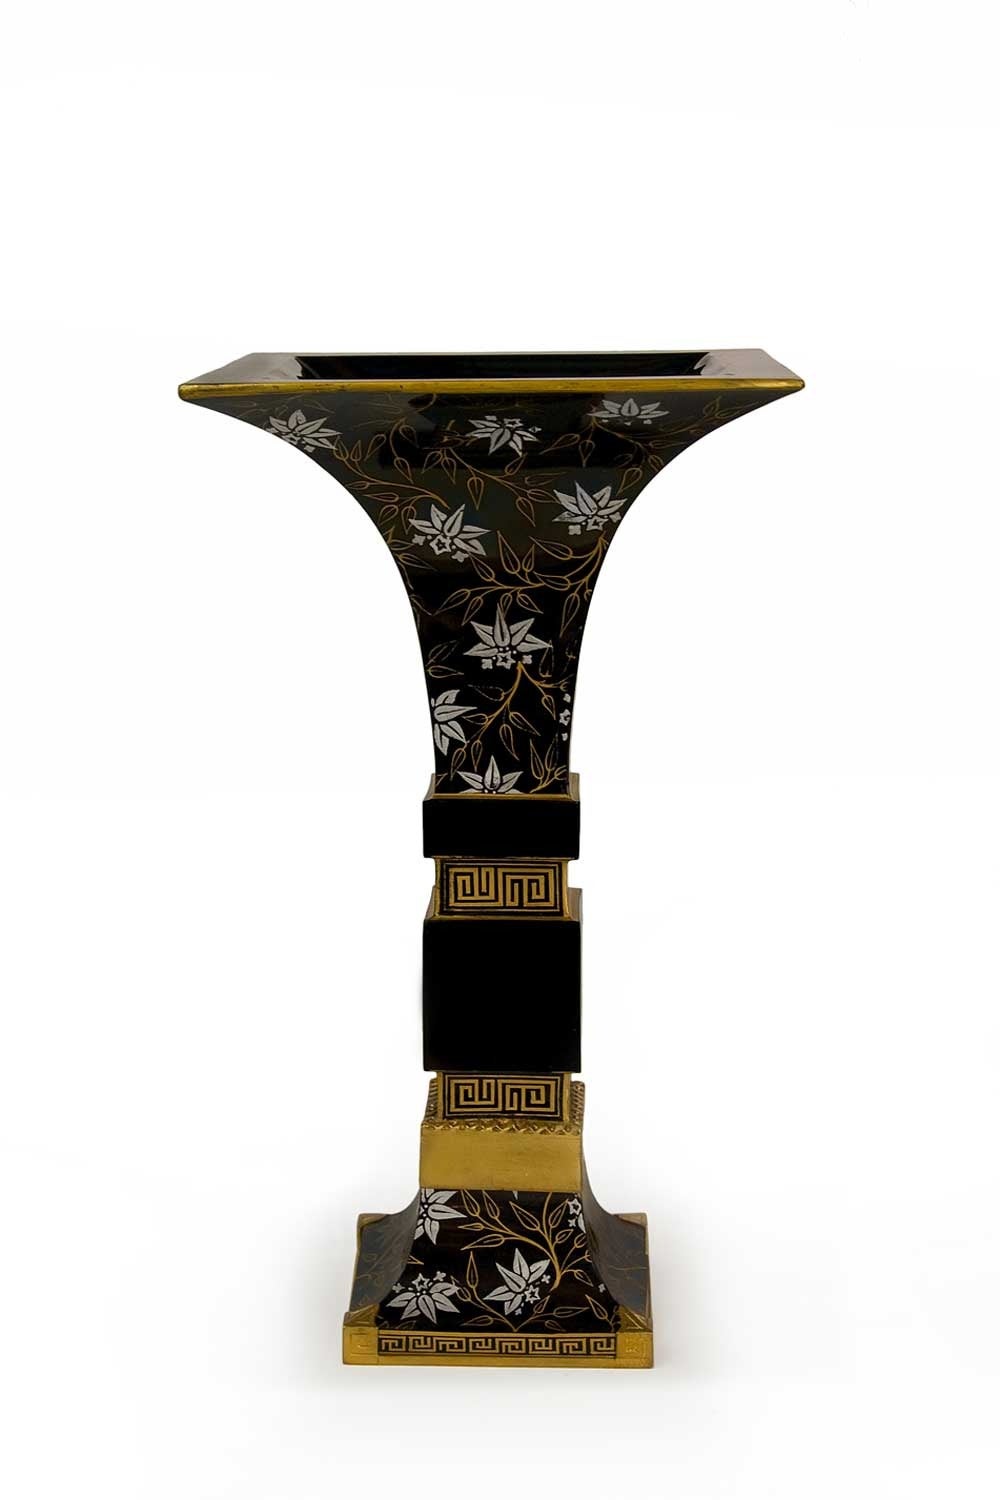 Quadrangular black crystal 'Gu' vase in solid blown 'Onyx' black crystal 'travaille a l'outil'. Japanese-style decor with Greek friezes and plant-painted gold and platinum attached to the flask - 'fixe au moufle'.

Intermediary mounting and